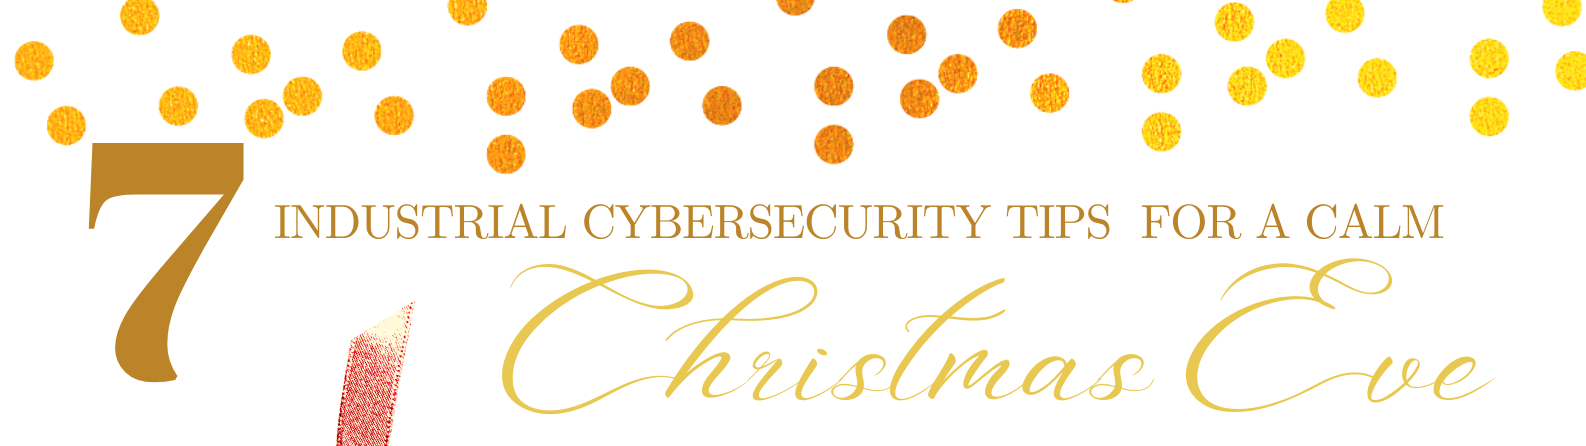 7 Industrial Cybersecurity Tips for a Calm Christmas Eve